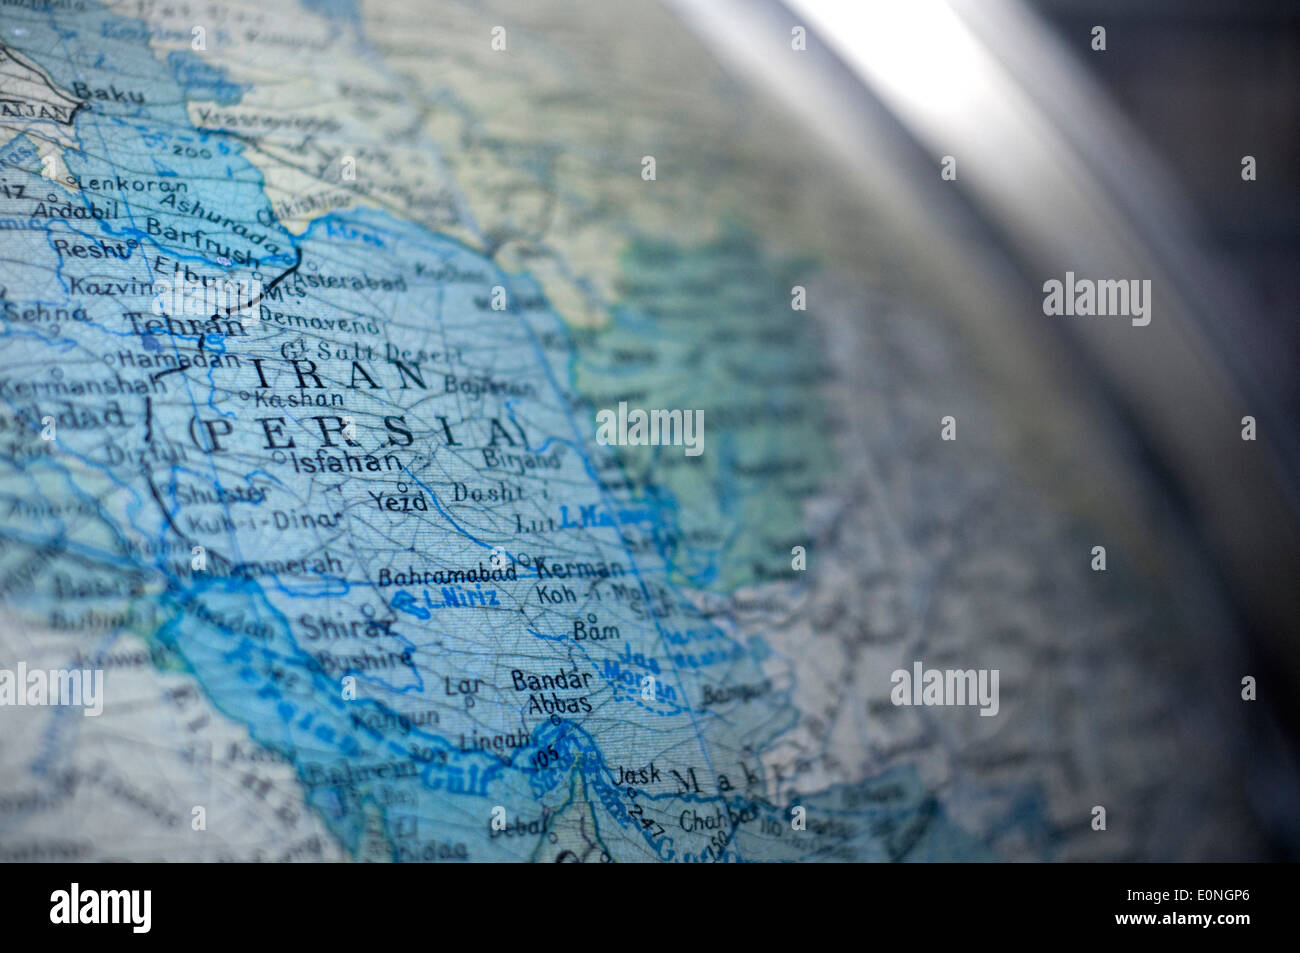 Map of Iran (Persia) captured on an antique globe. Stock Photo